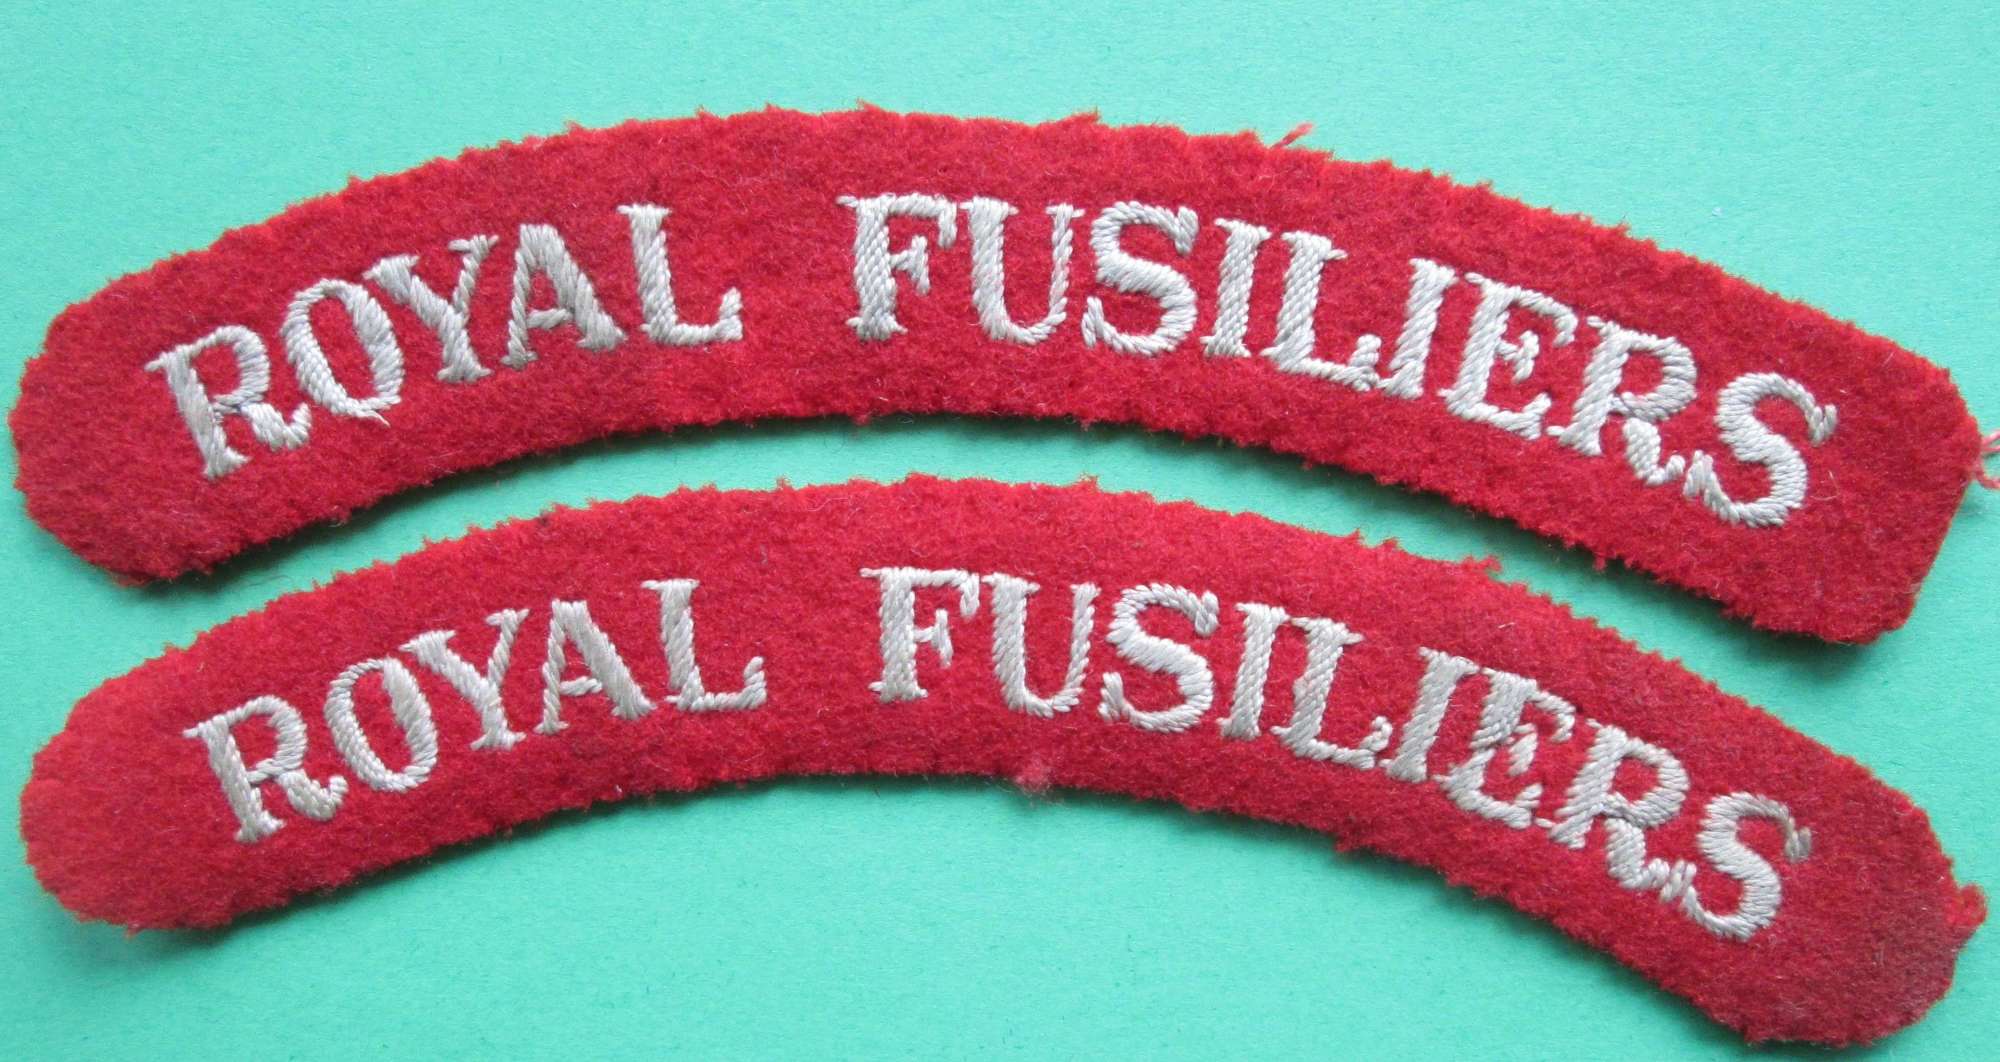 A PAIR OF ROYAL FUSILIERS SHOULDER TITLES